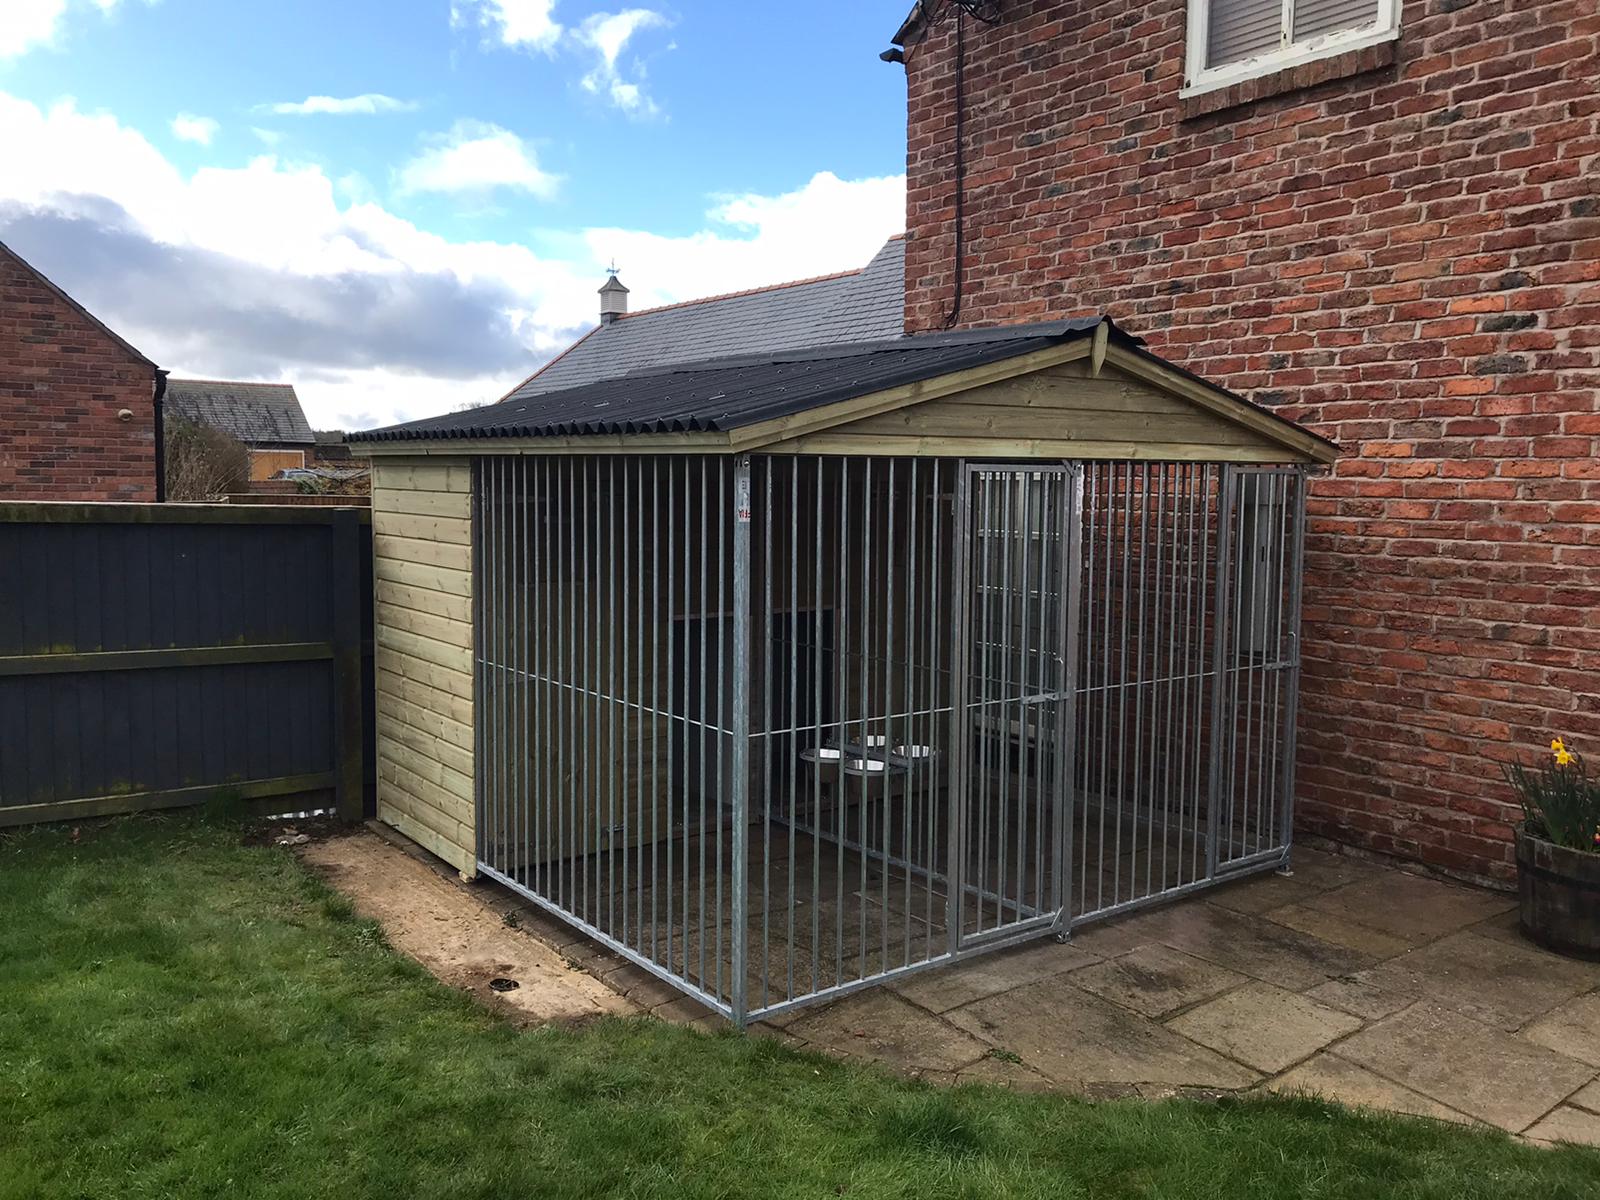 Wymbury Double Front Entry 2 Bay Dog Kennel - 10ft(W) x 10'6(D)